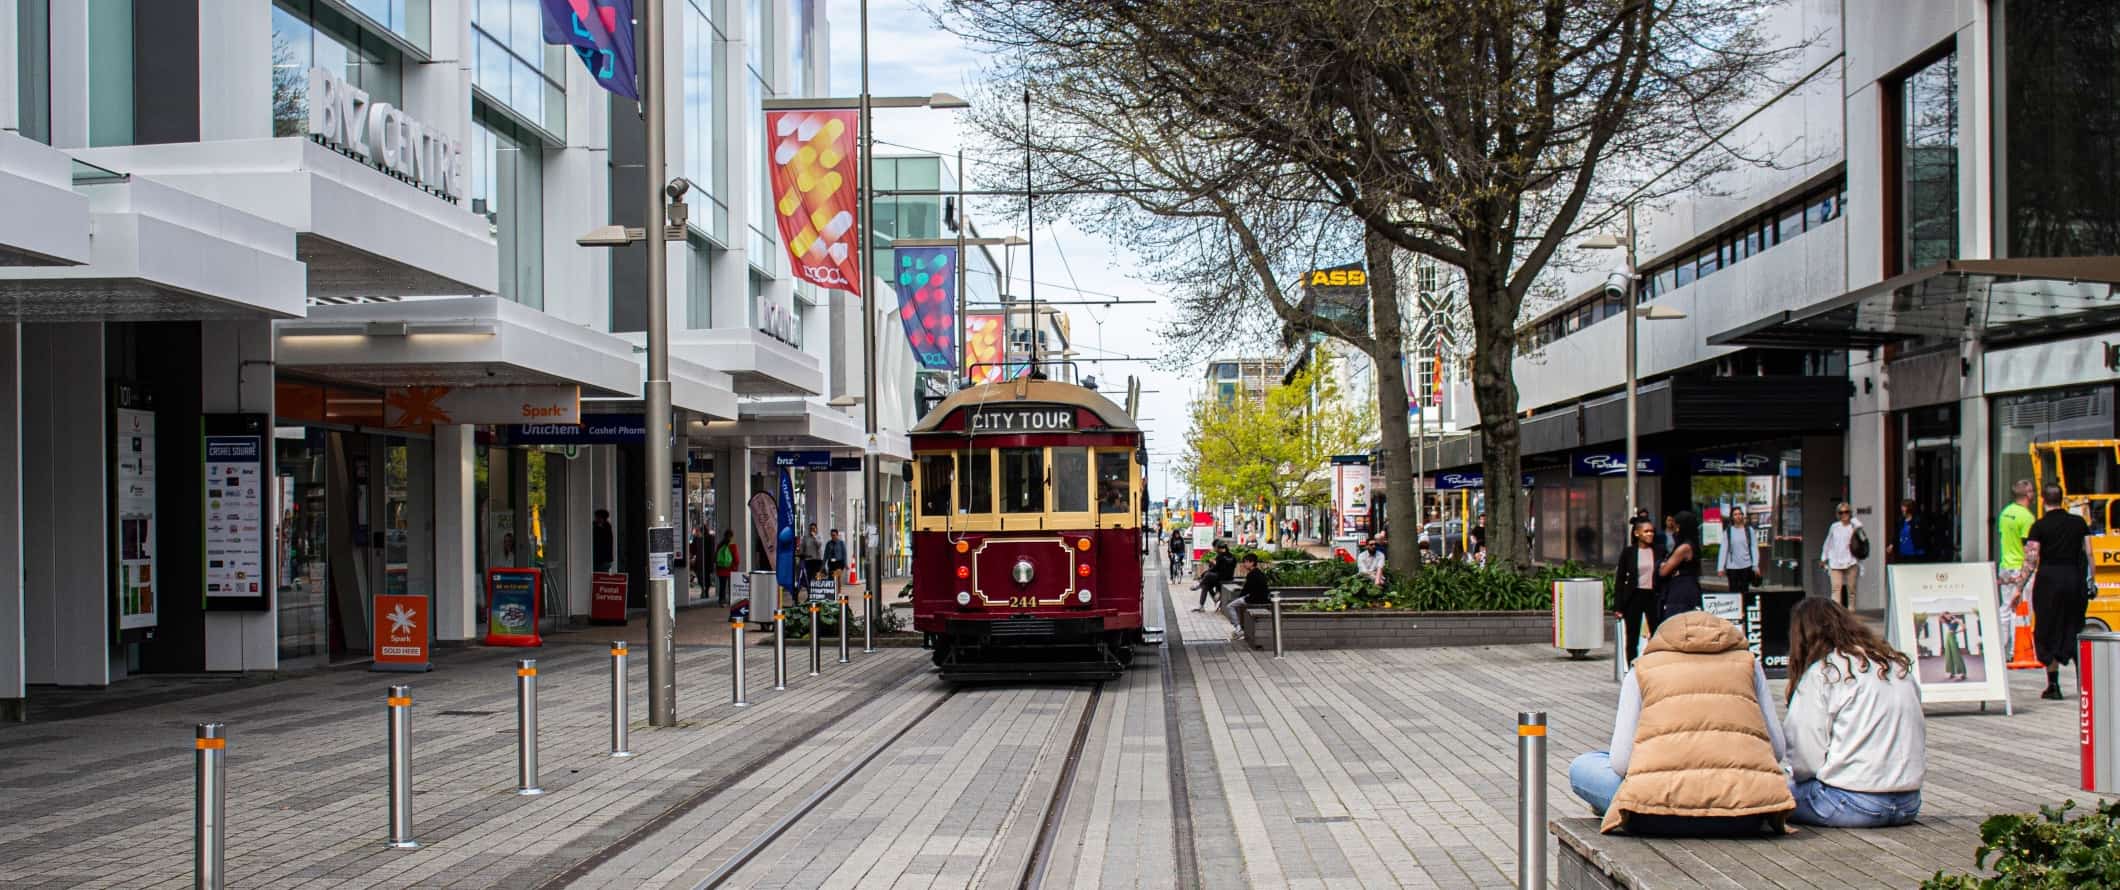 Historic tram in downtown Christchurch, New Zealand.